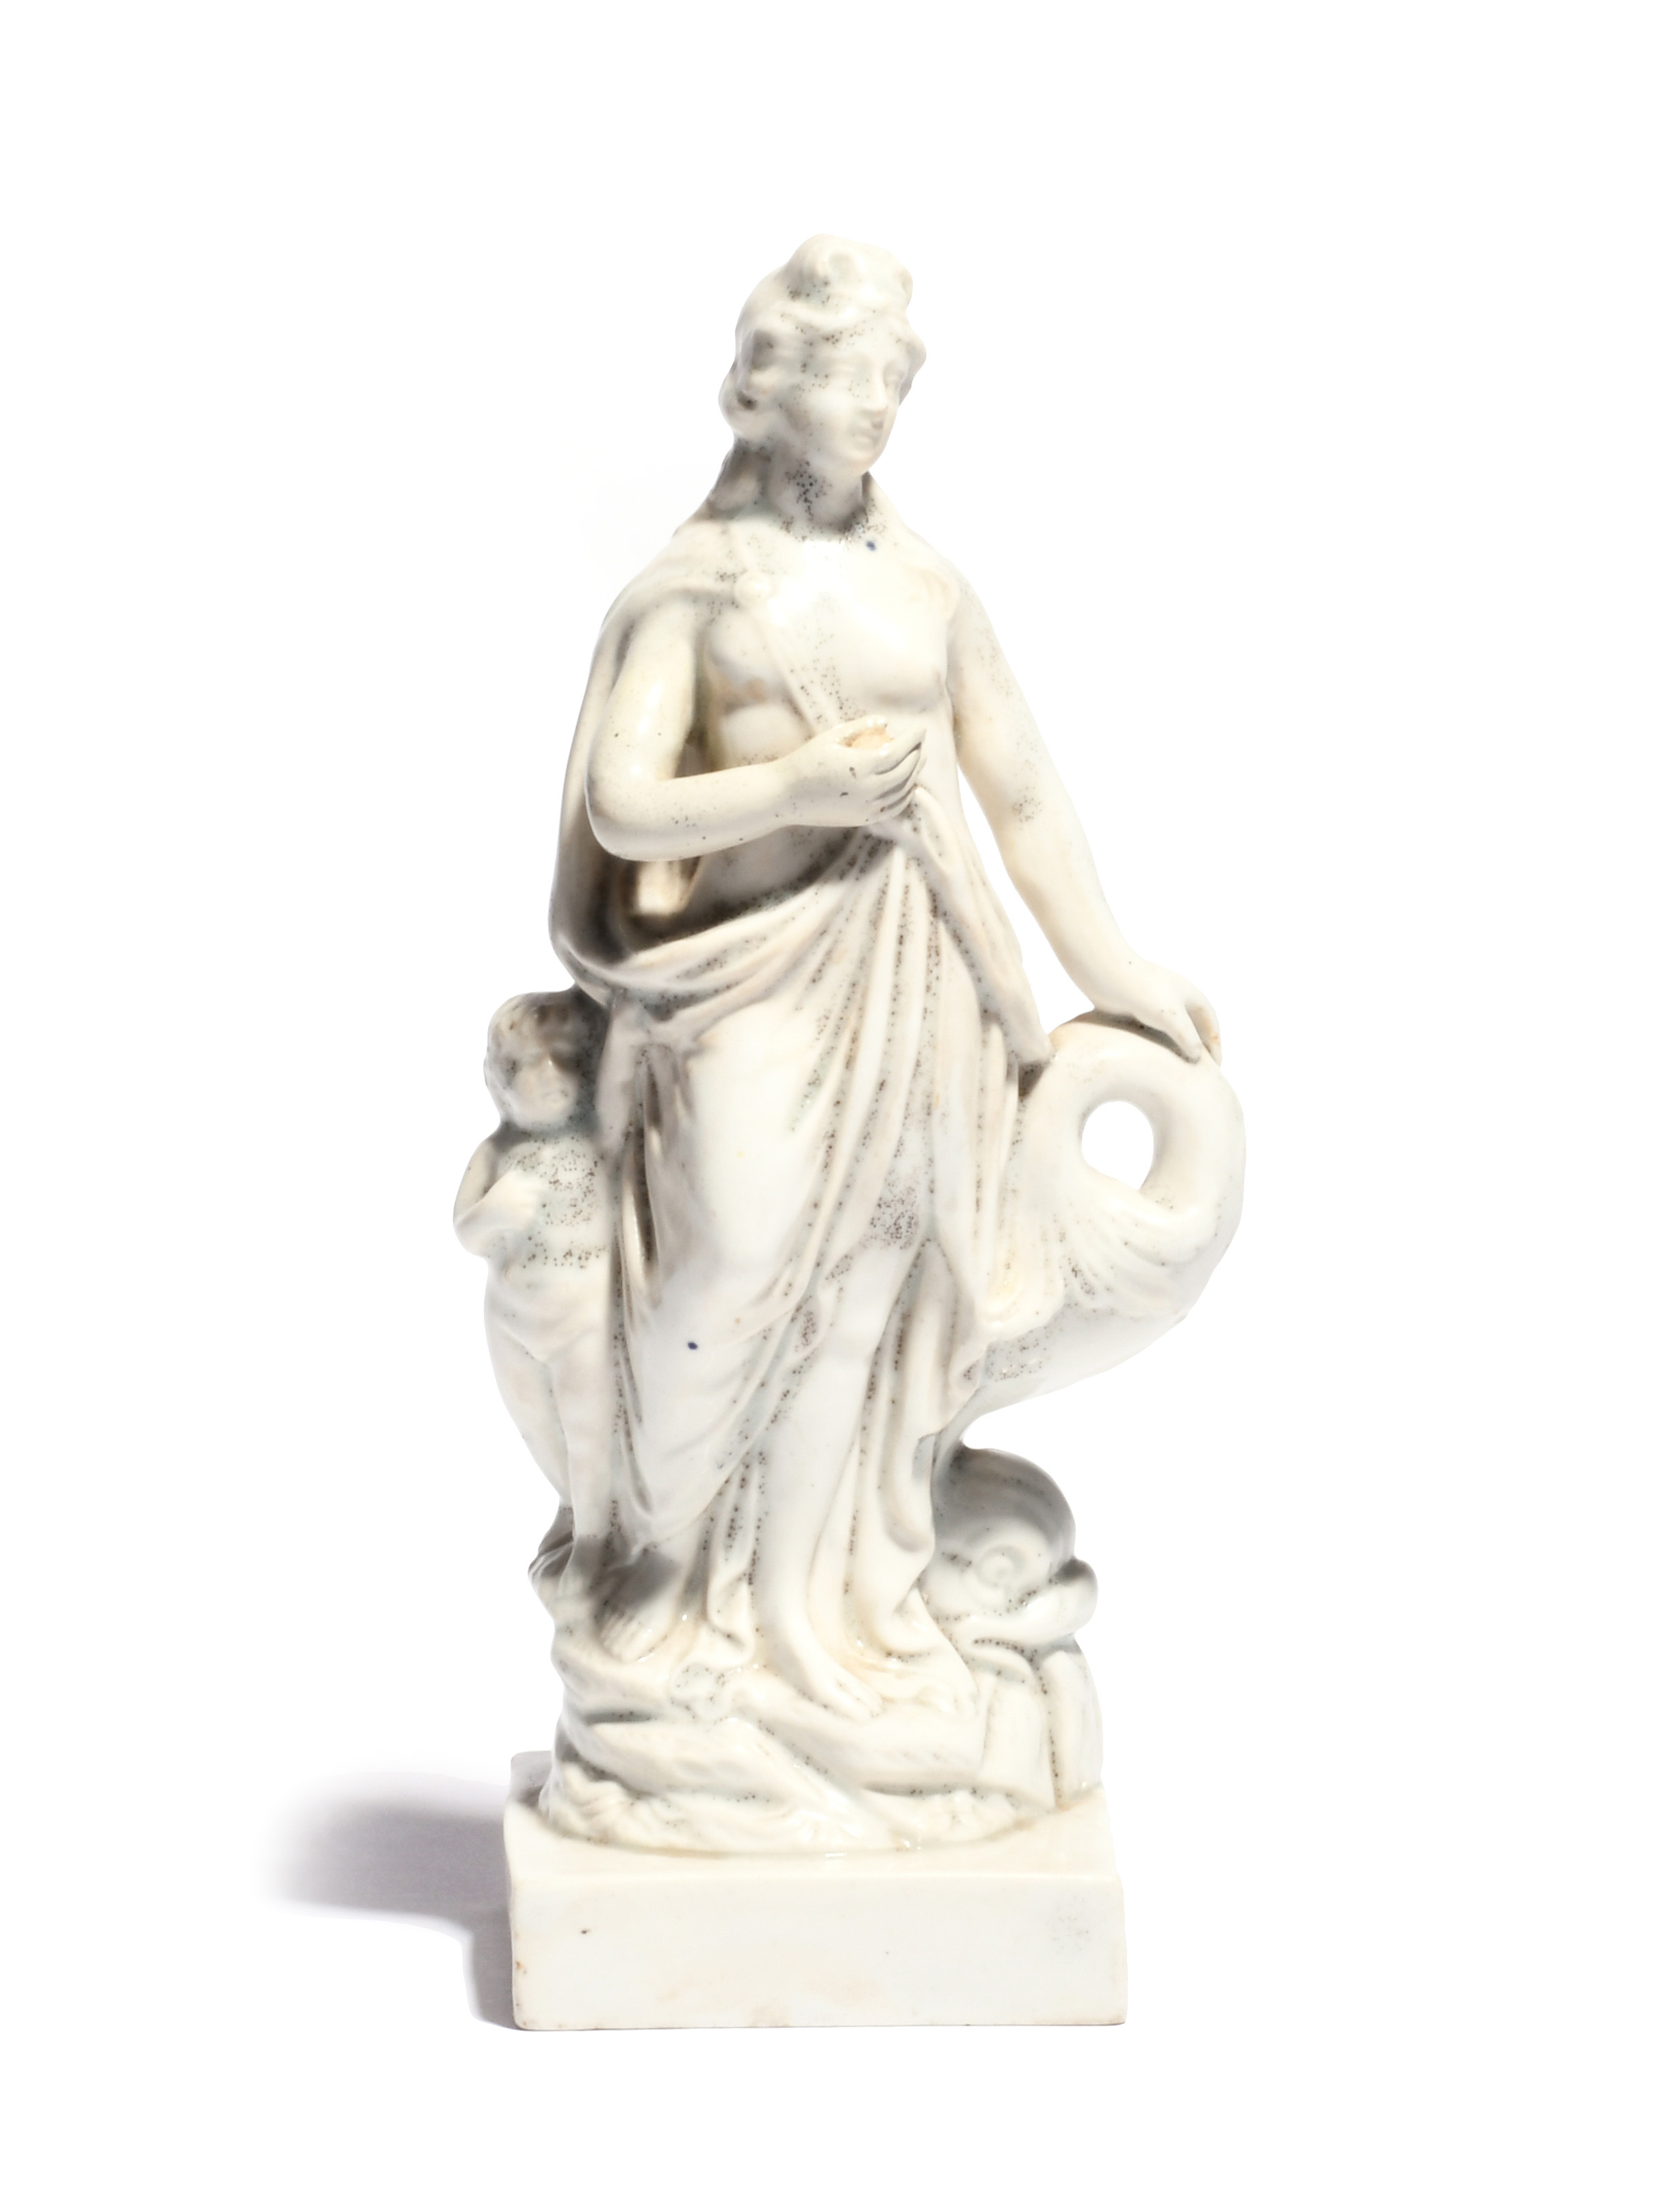 A Staffordshire porcelain figure of Venus late 18th century, standing and resting one hand on the